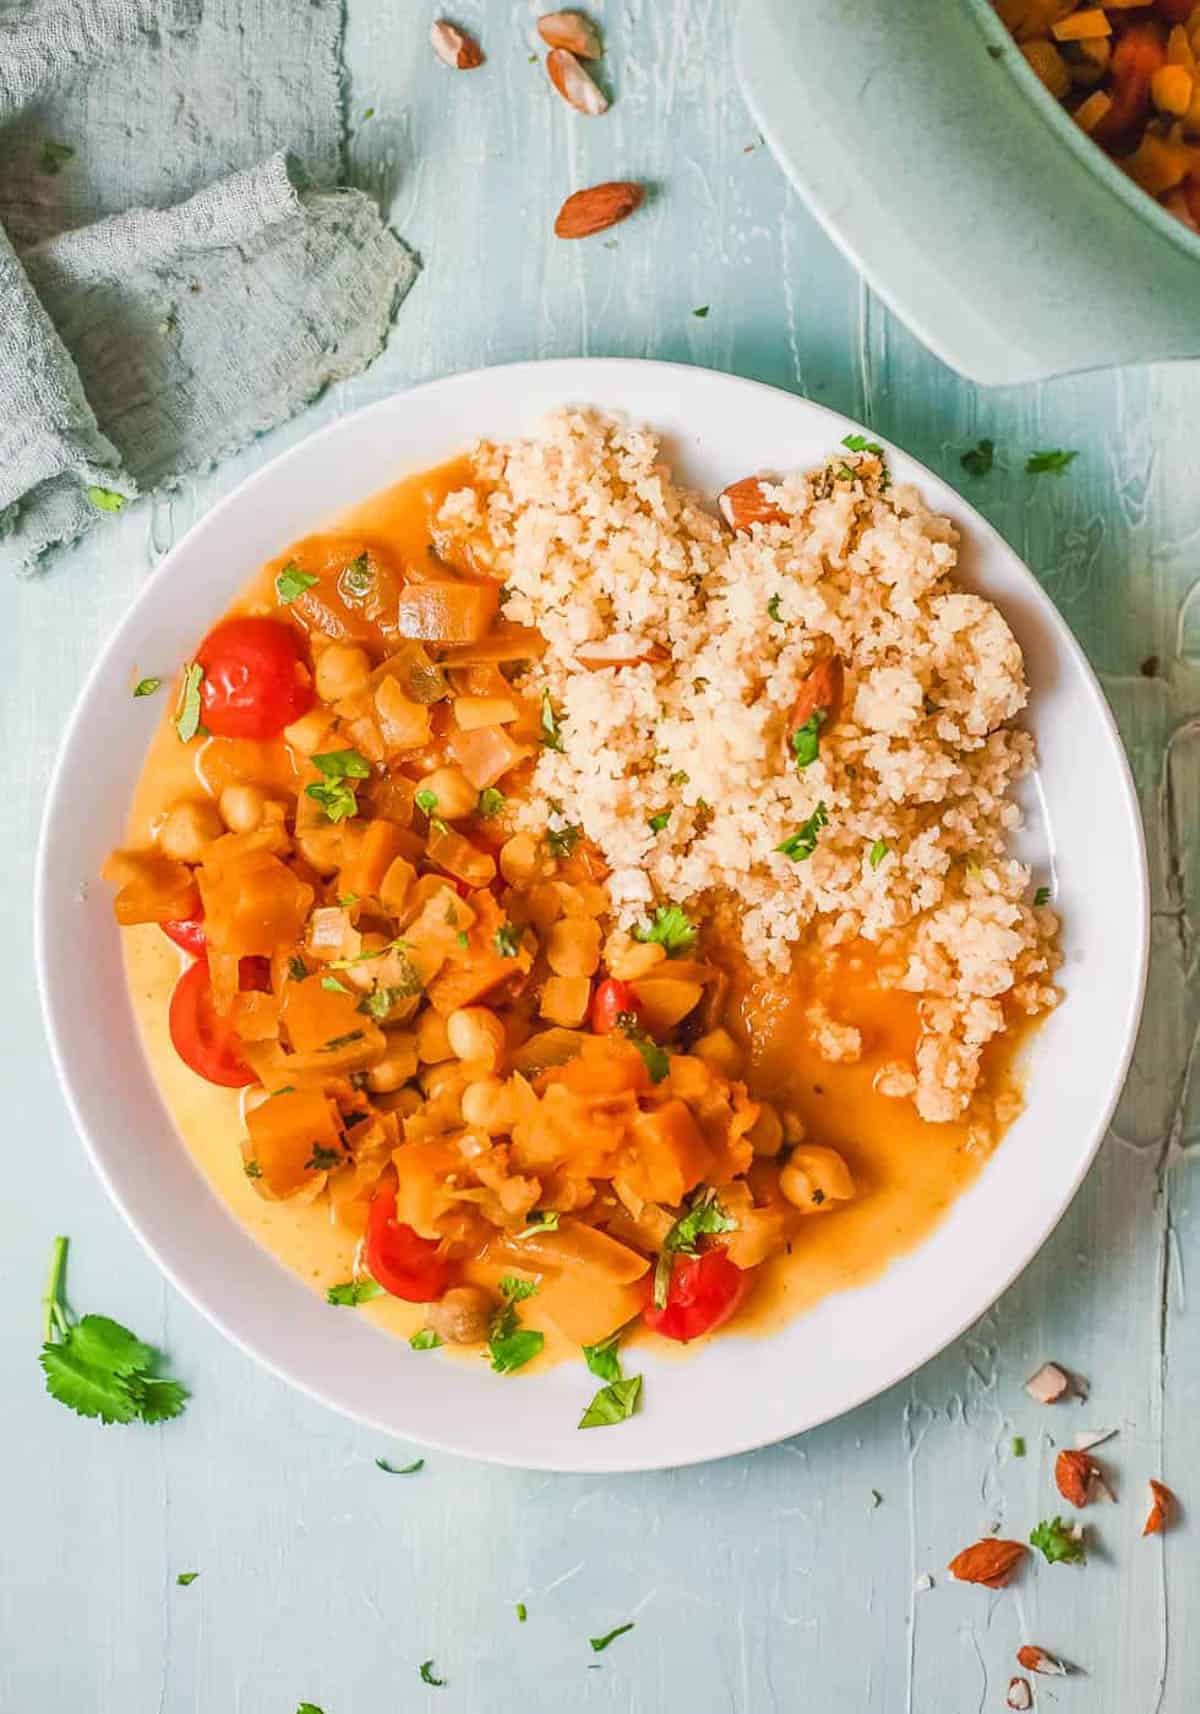 Butternut squash and chickpea curry, served on a white plate with couscous on the side.